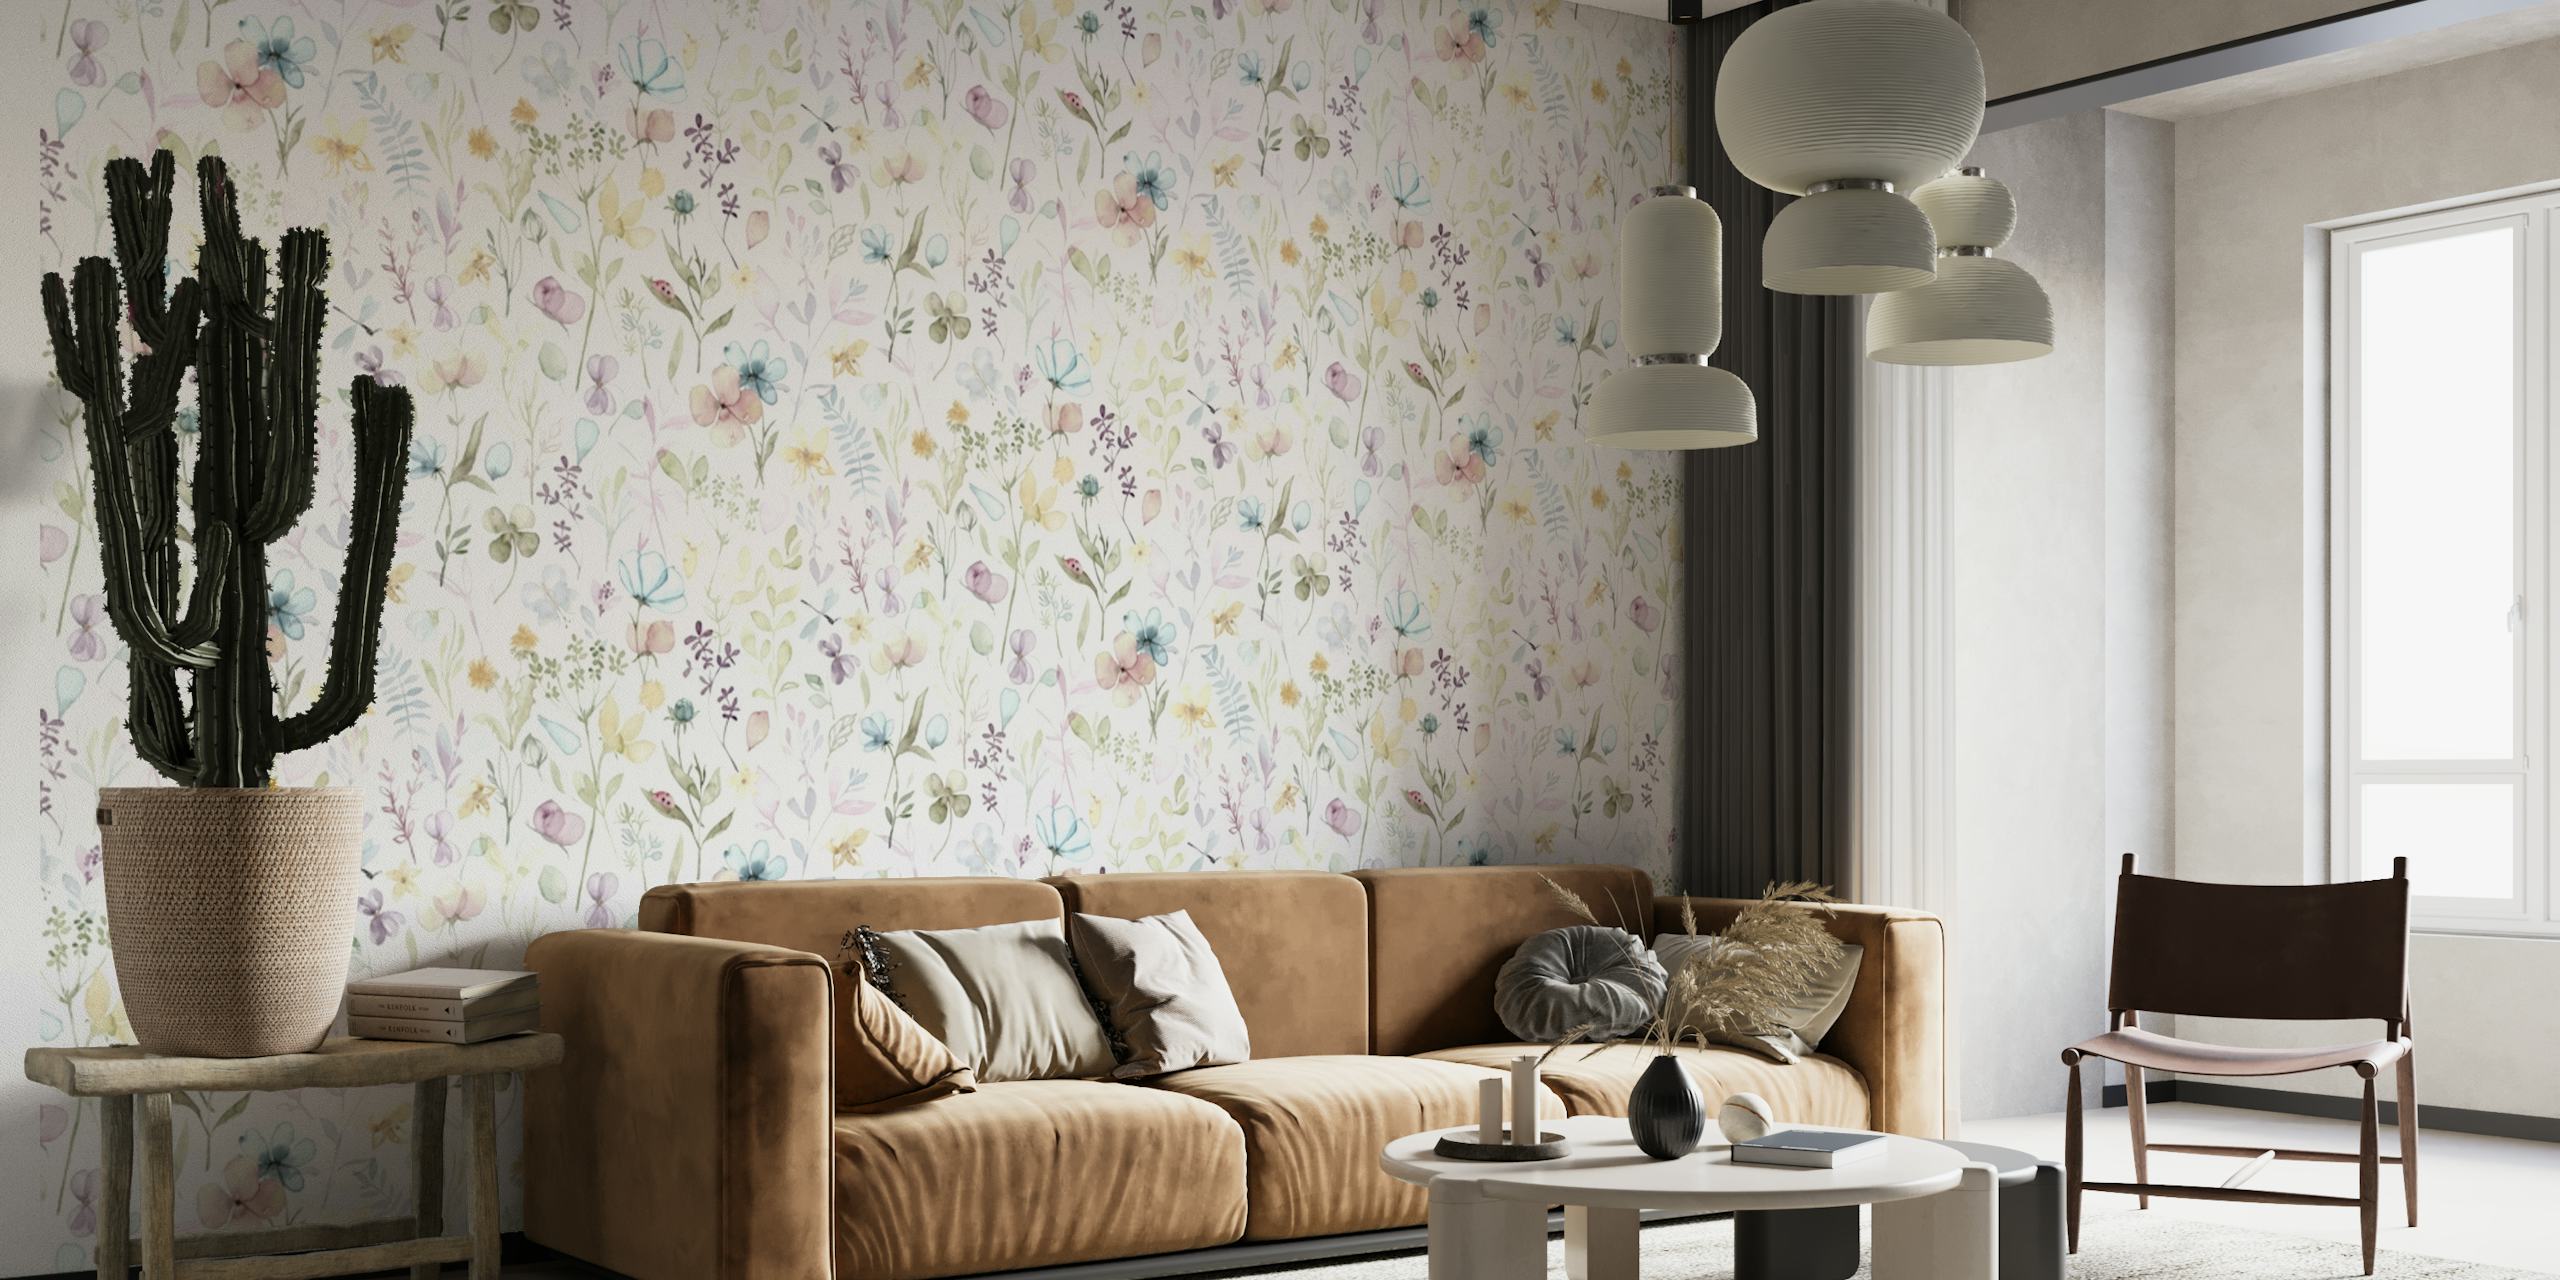 Spring Floral Meadow wall mural with a light, delicate pattern of wildflowers